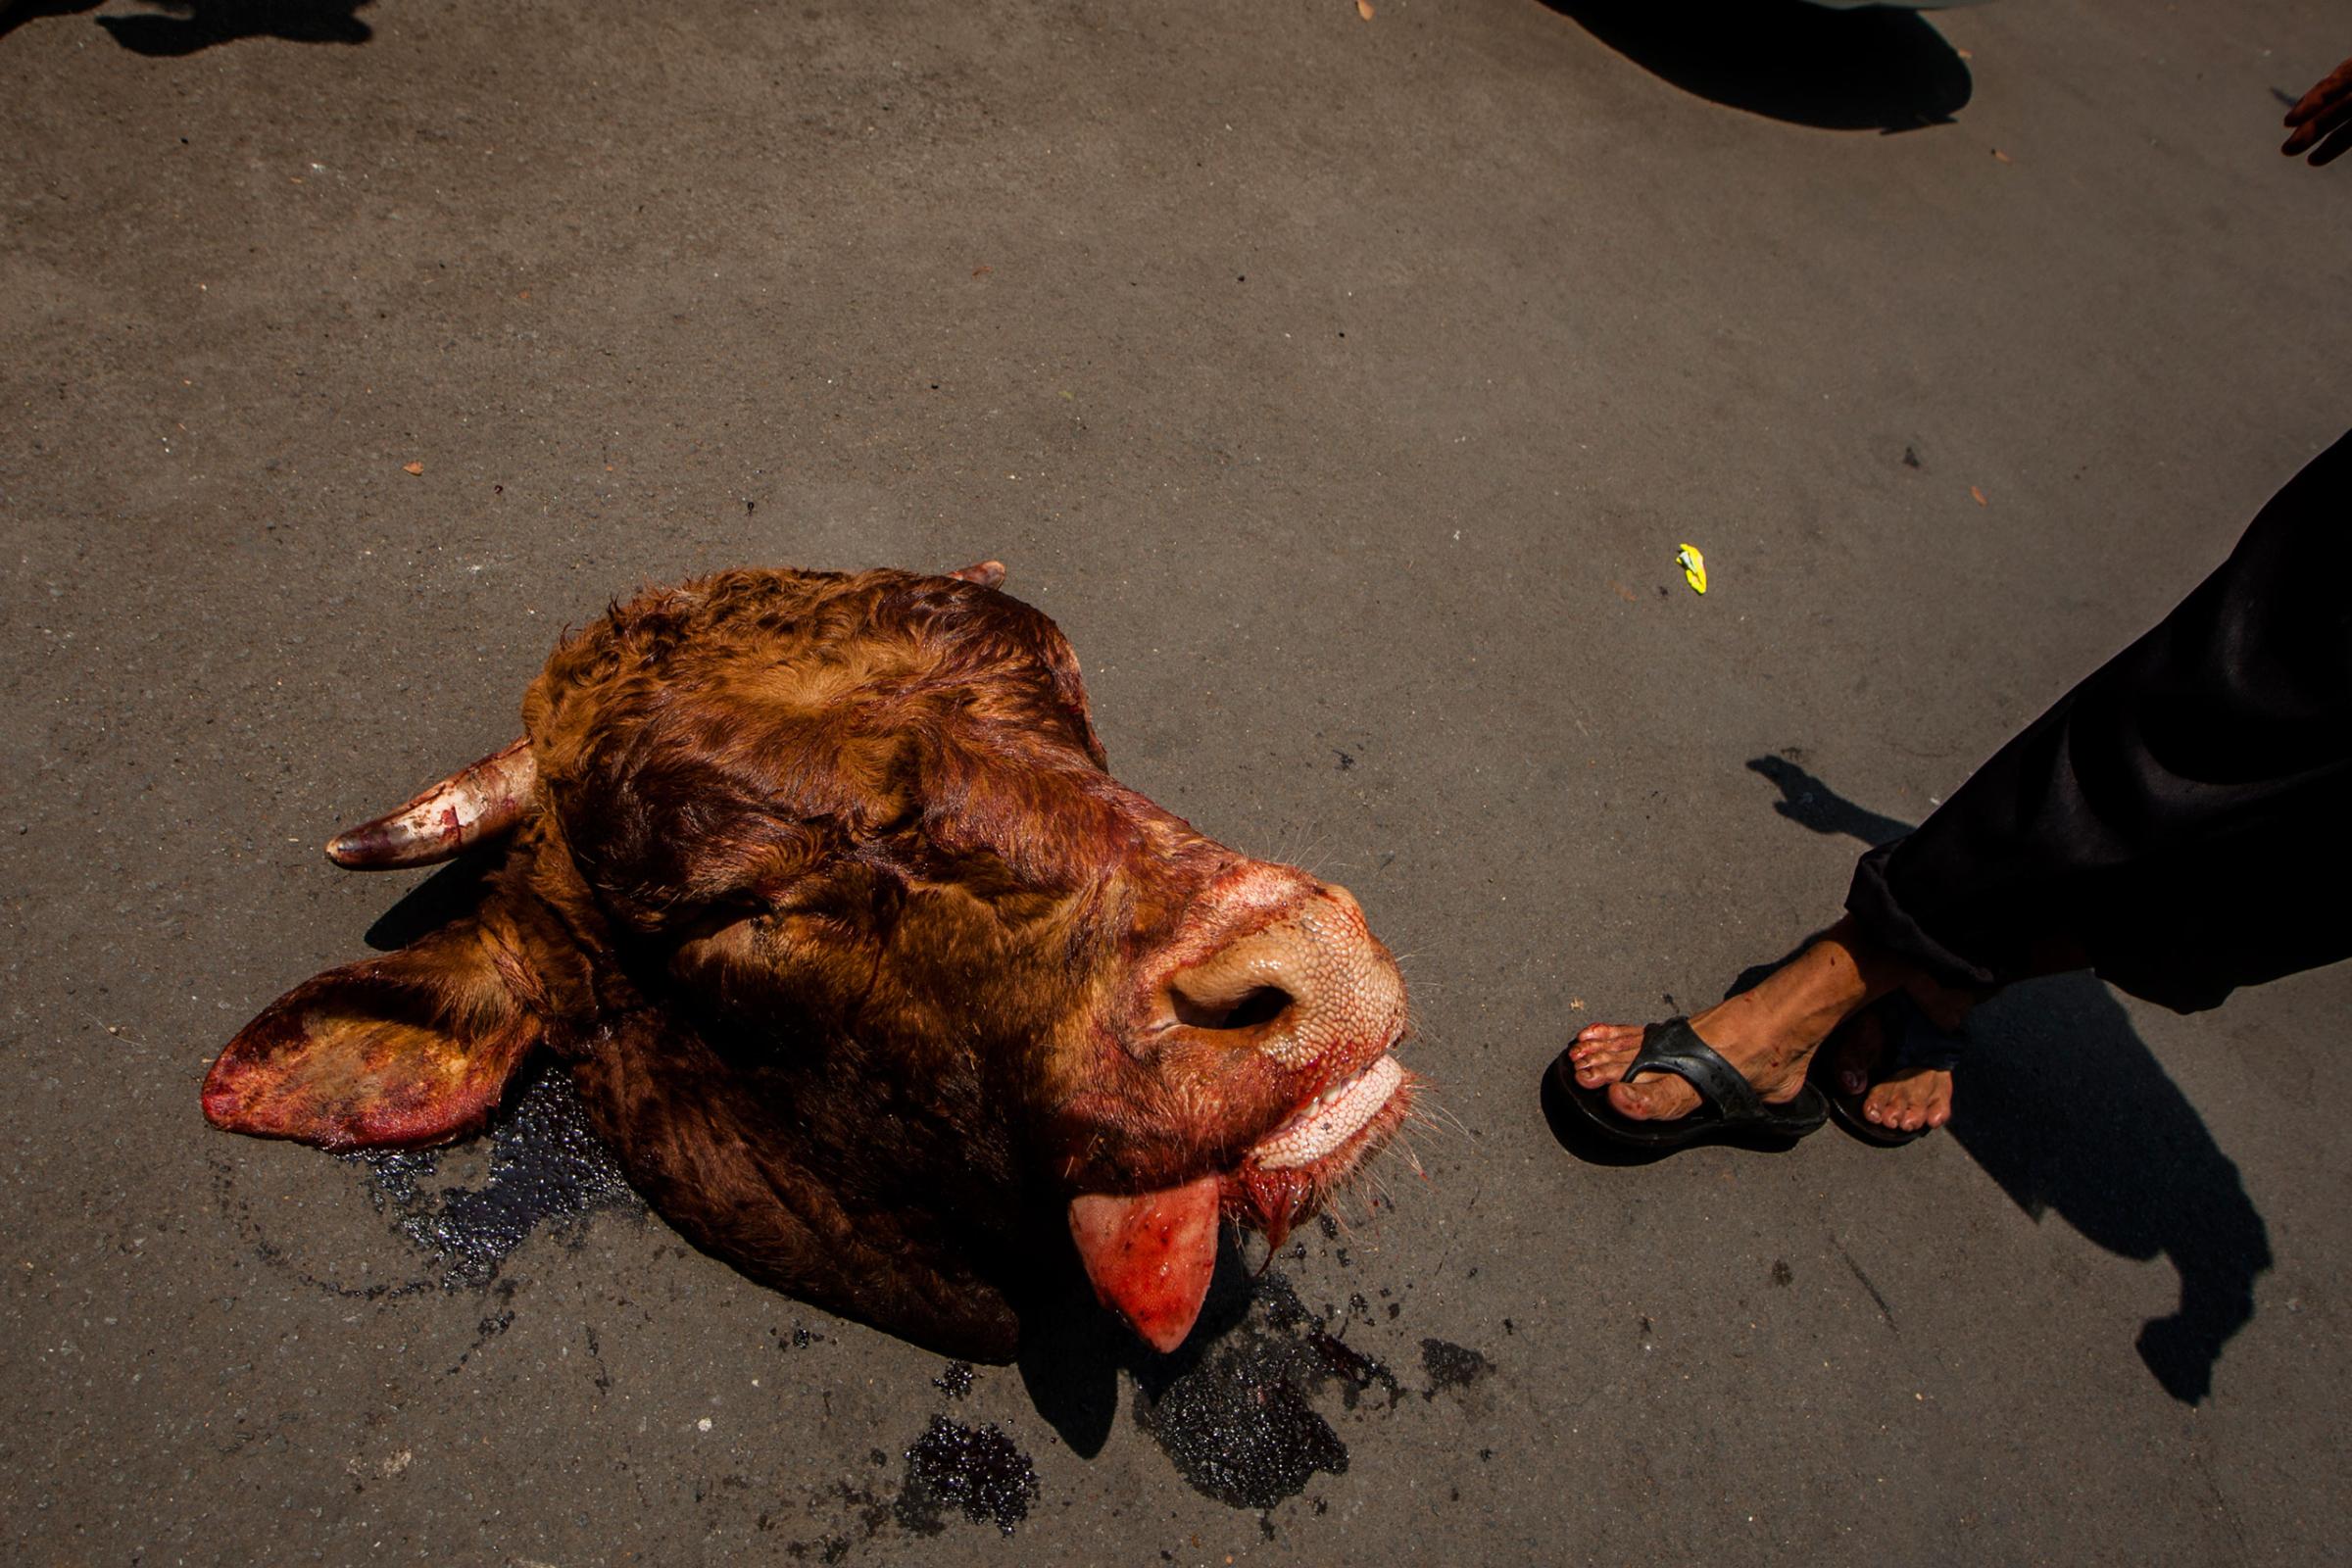 The head of a cow after slaughter is seen during celebrations of Eid al-Adha at Sunda Kelapa Mosque in Jakarta, Indonesia, Sept. 24, 2015